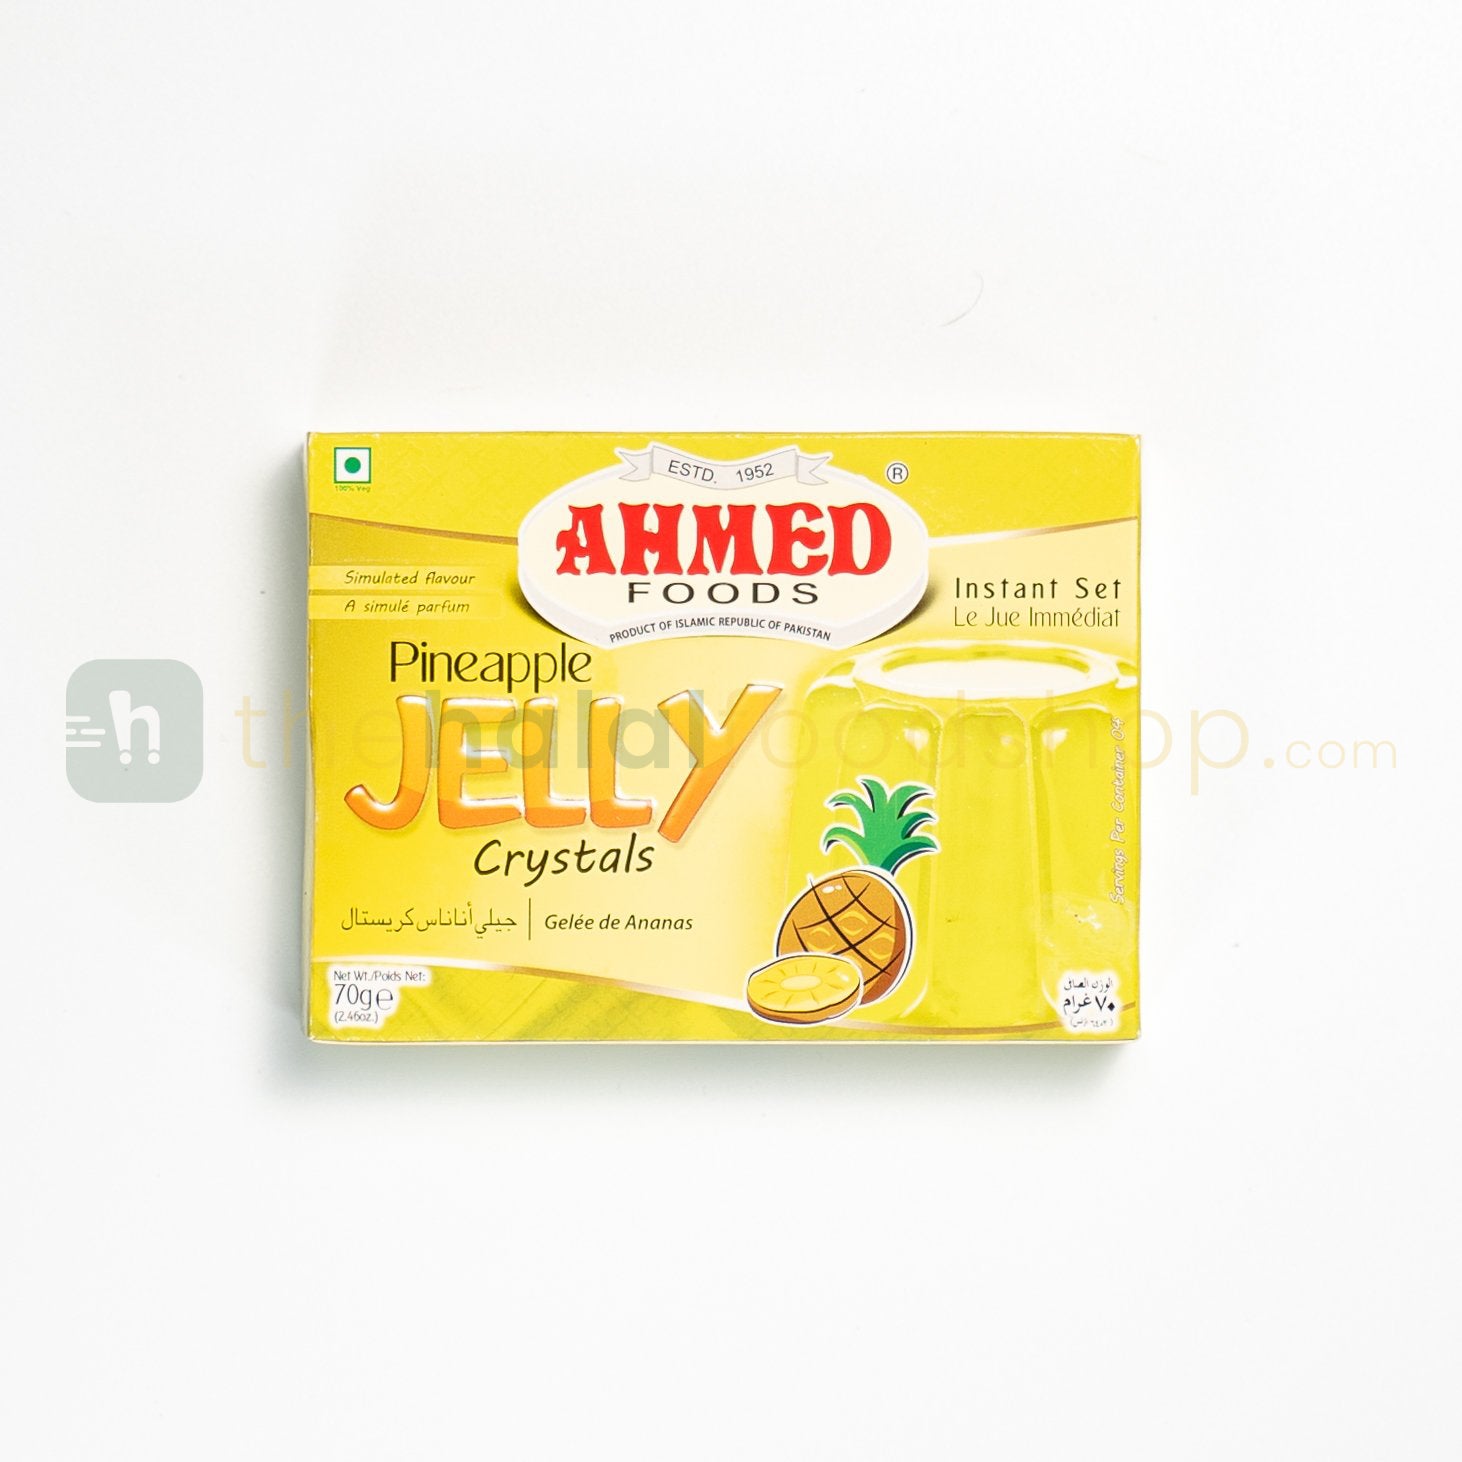 Ahmed Foods Pineapple Jelly Crystals (80g)